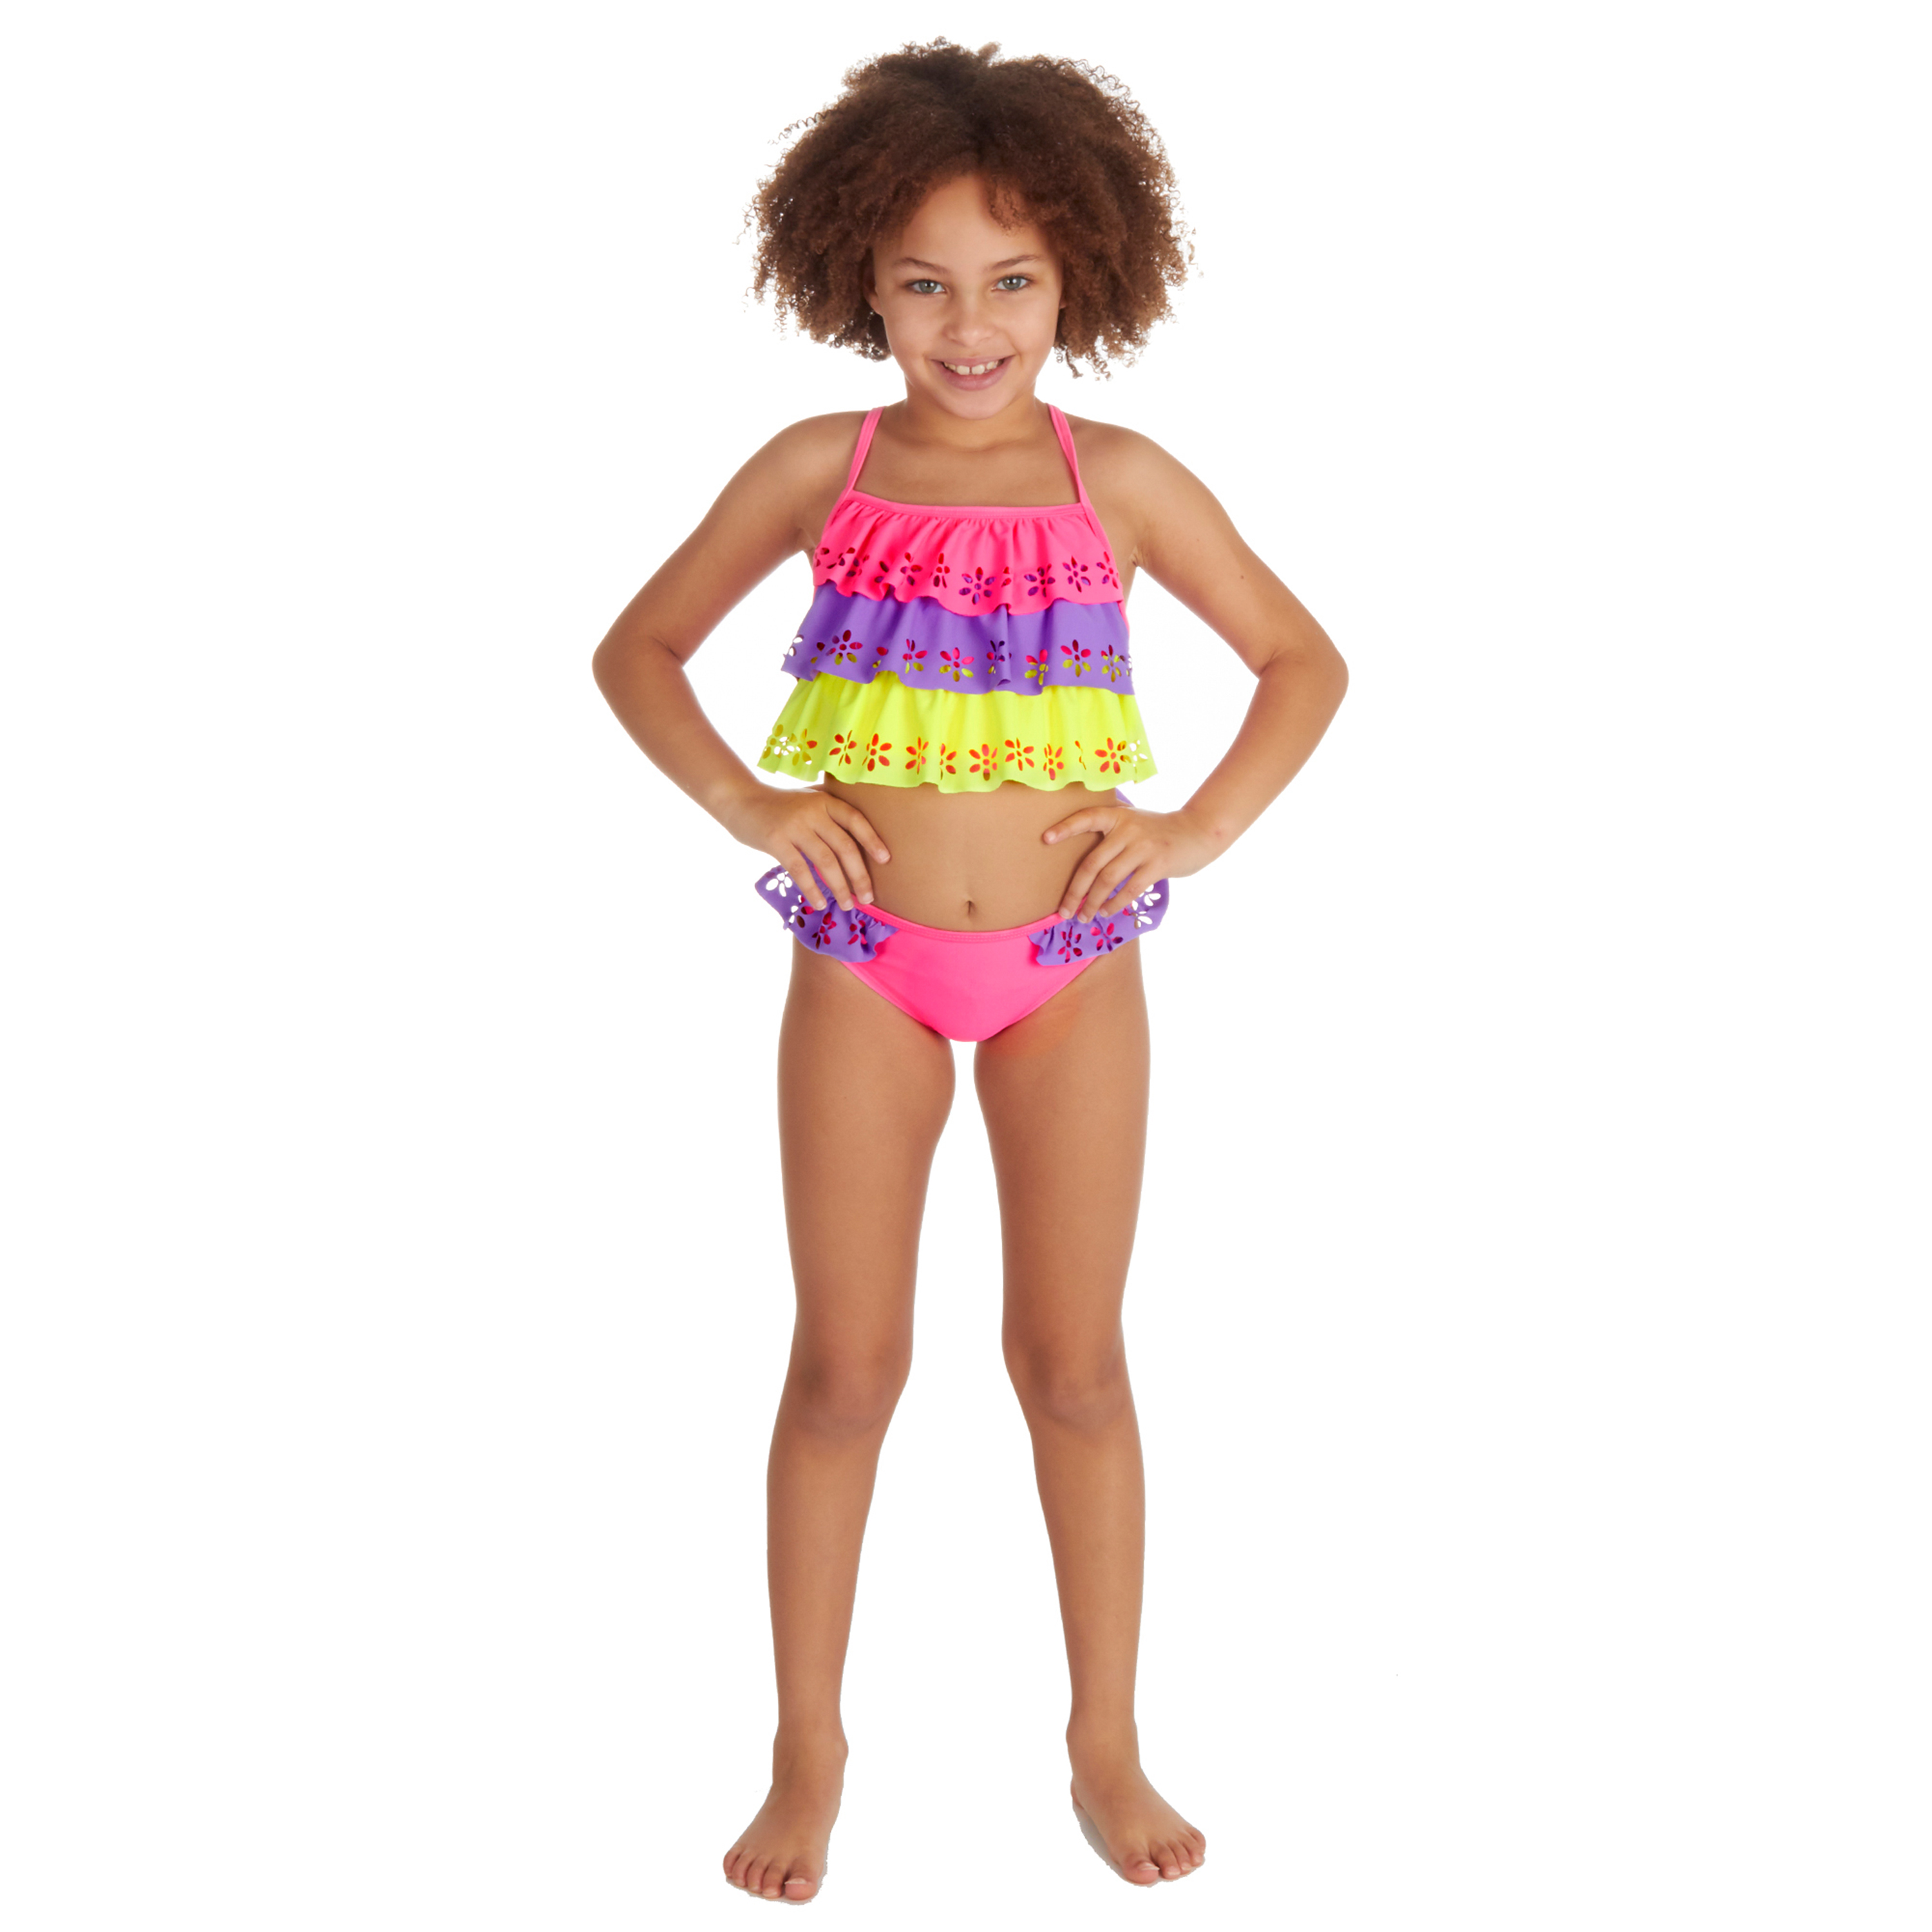 Floral Printed Two Piece Swimsuit Set Back For Baby Girls Cute Summer Split Bikini  Swimsuits For Toddlers And Kids Casual Beachwear For Children Aged 0 5  Years From Stephen_babykids, $12.56